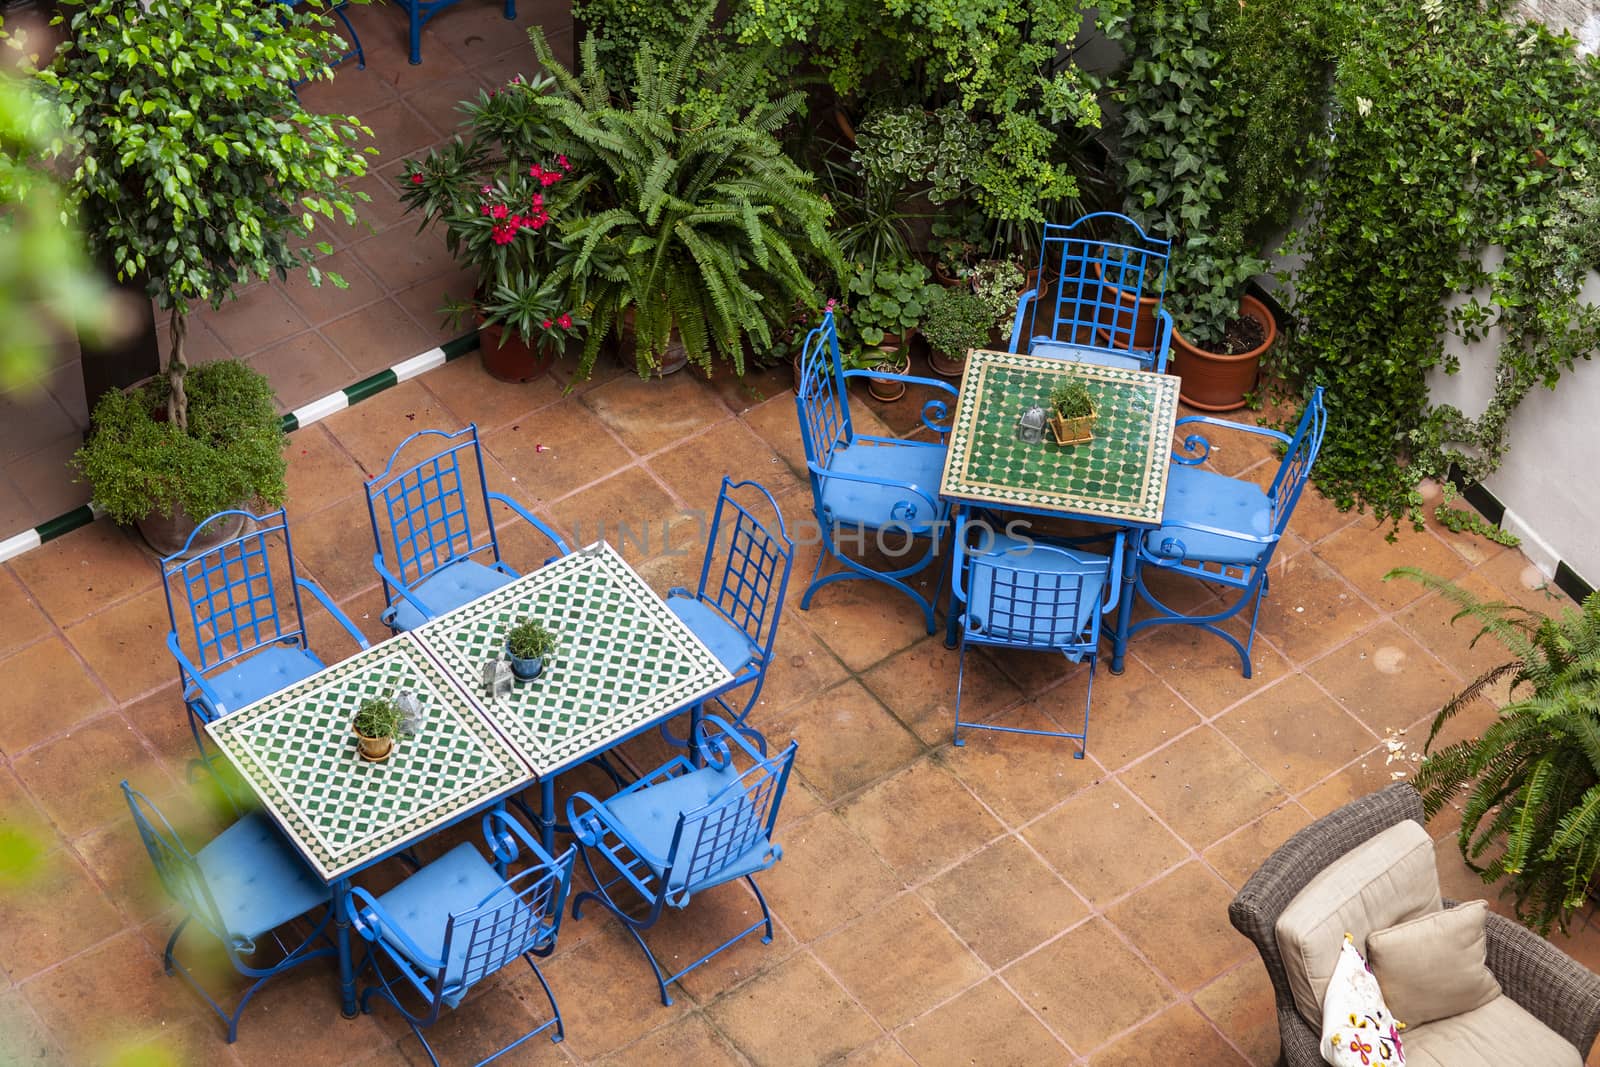 Typical patio in Andalusia, Seville, 2014 by vlad-m